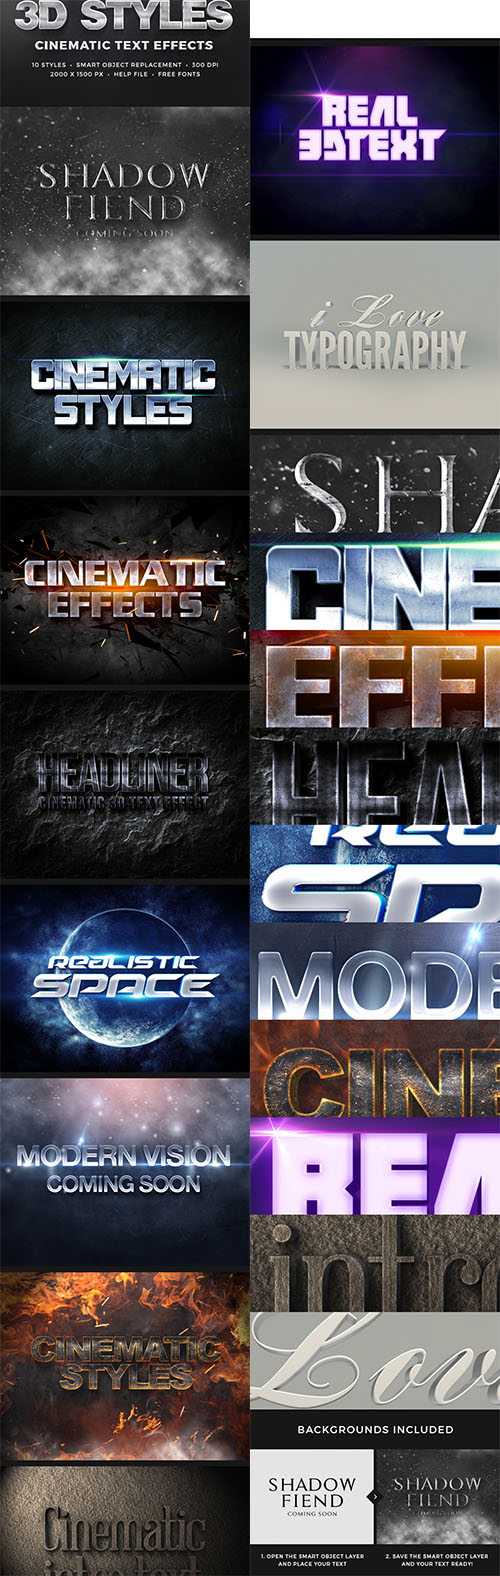 GraphicRiver - 3D Cinematic Text Effects Vol.01 11031893